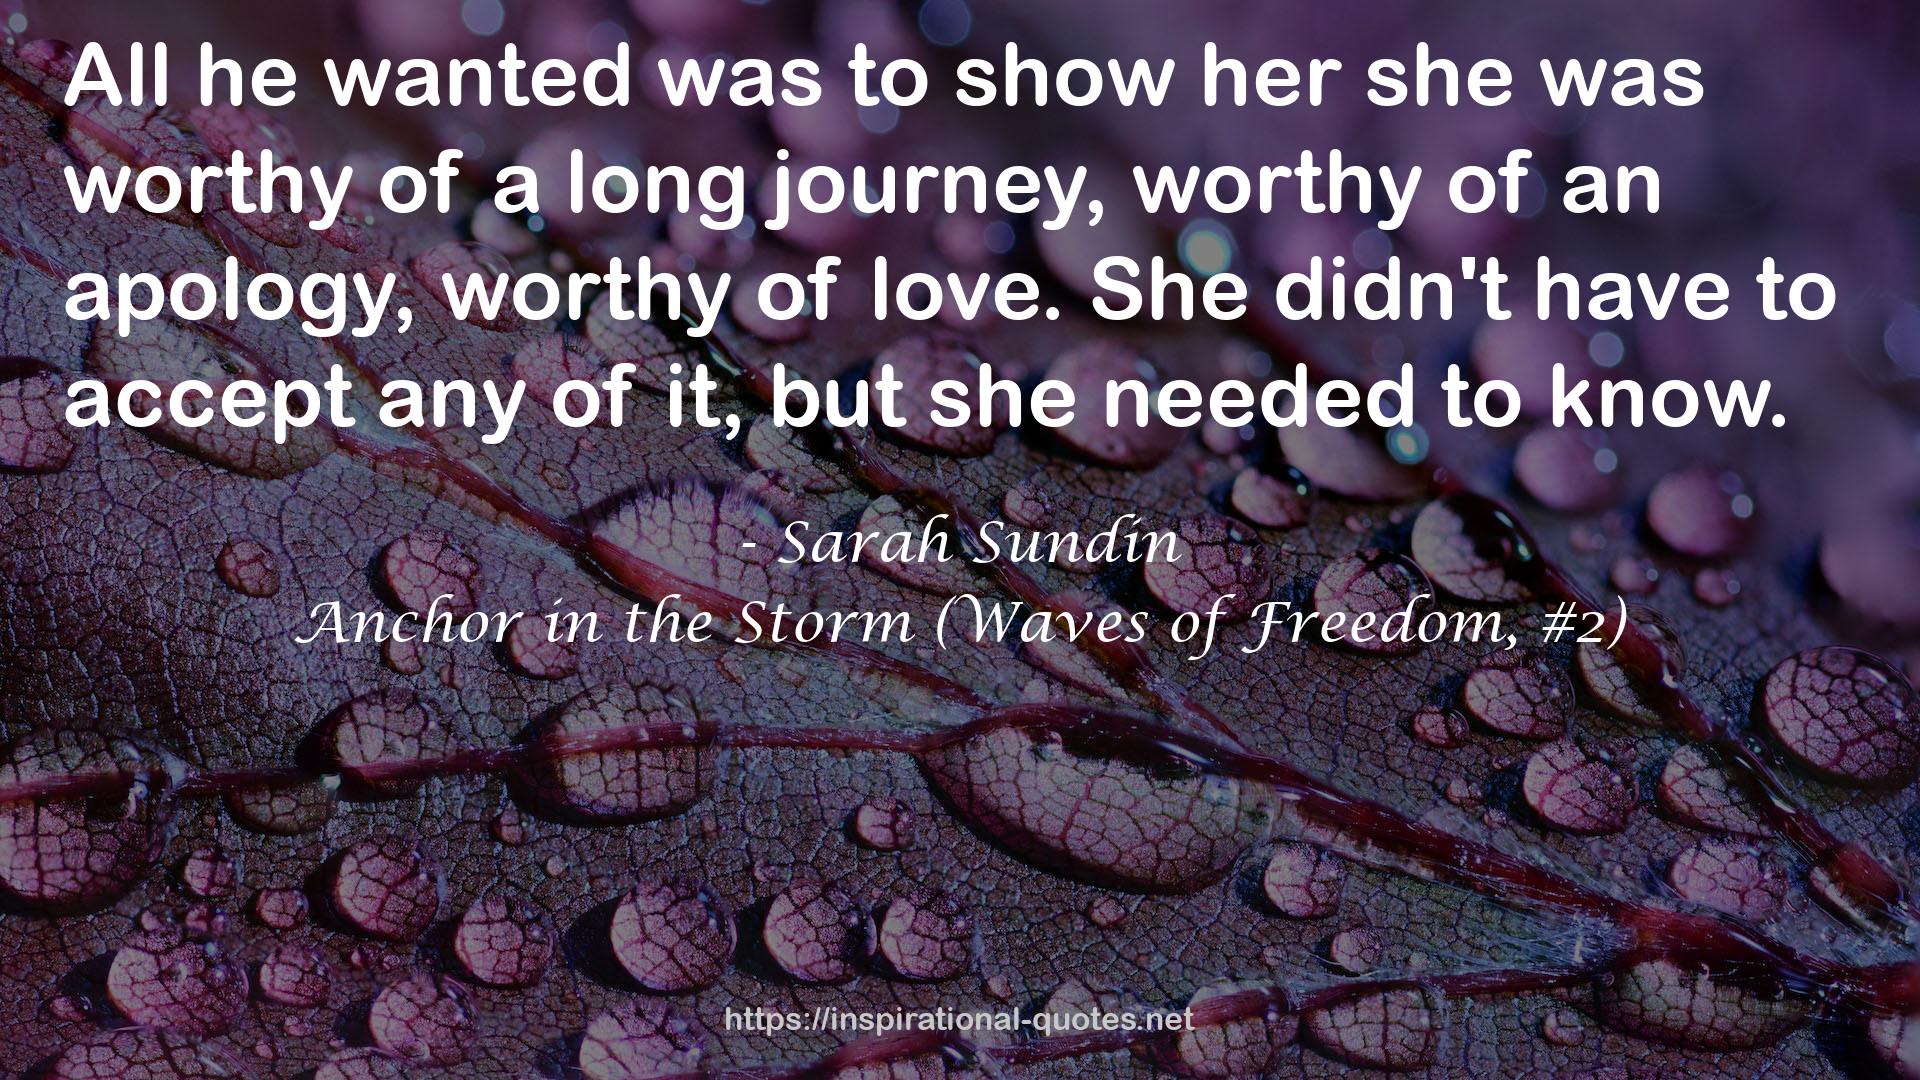 Anchor in the Storm (Waves of Freedom, #2) QUOTES